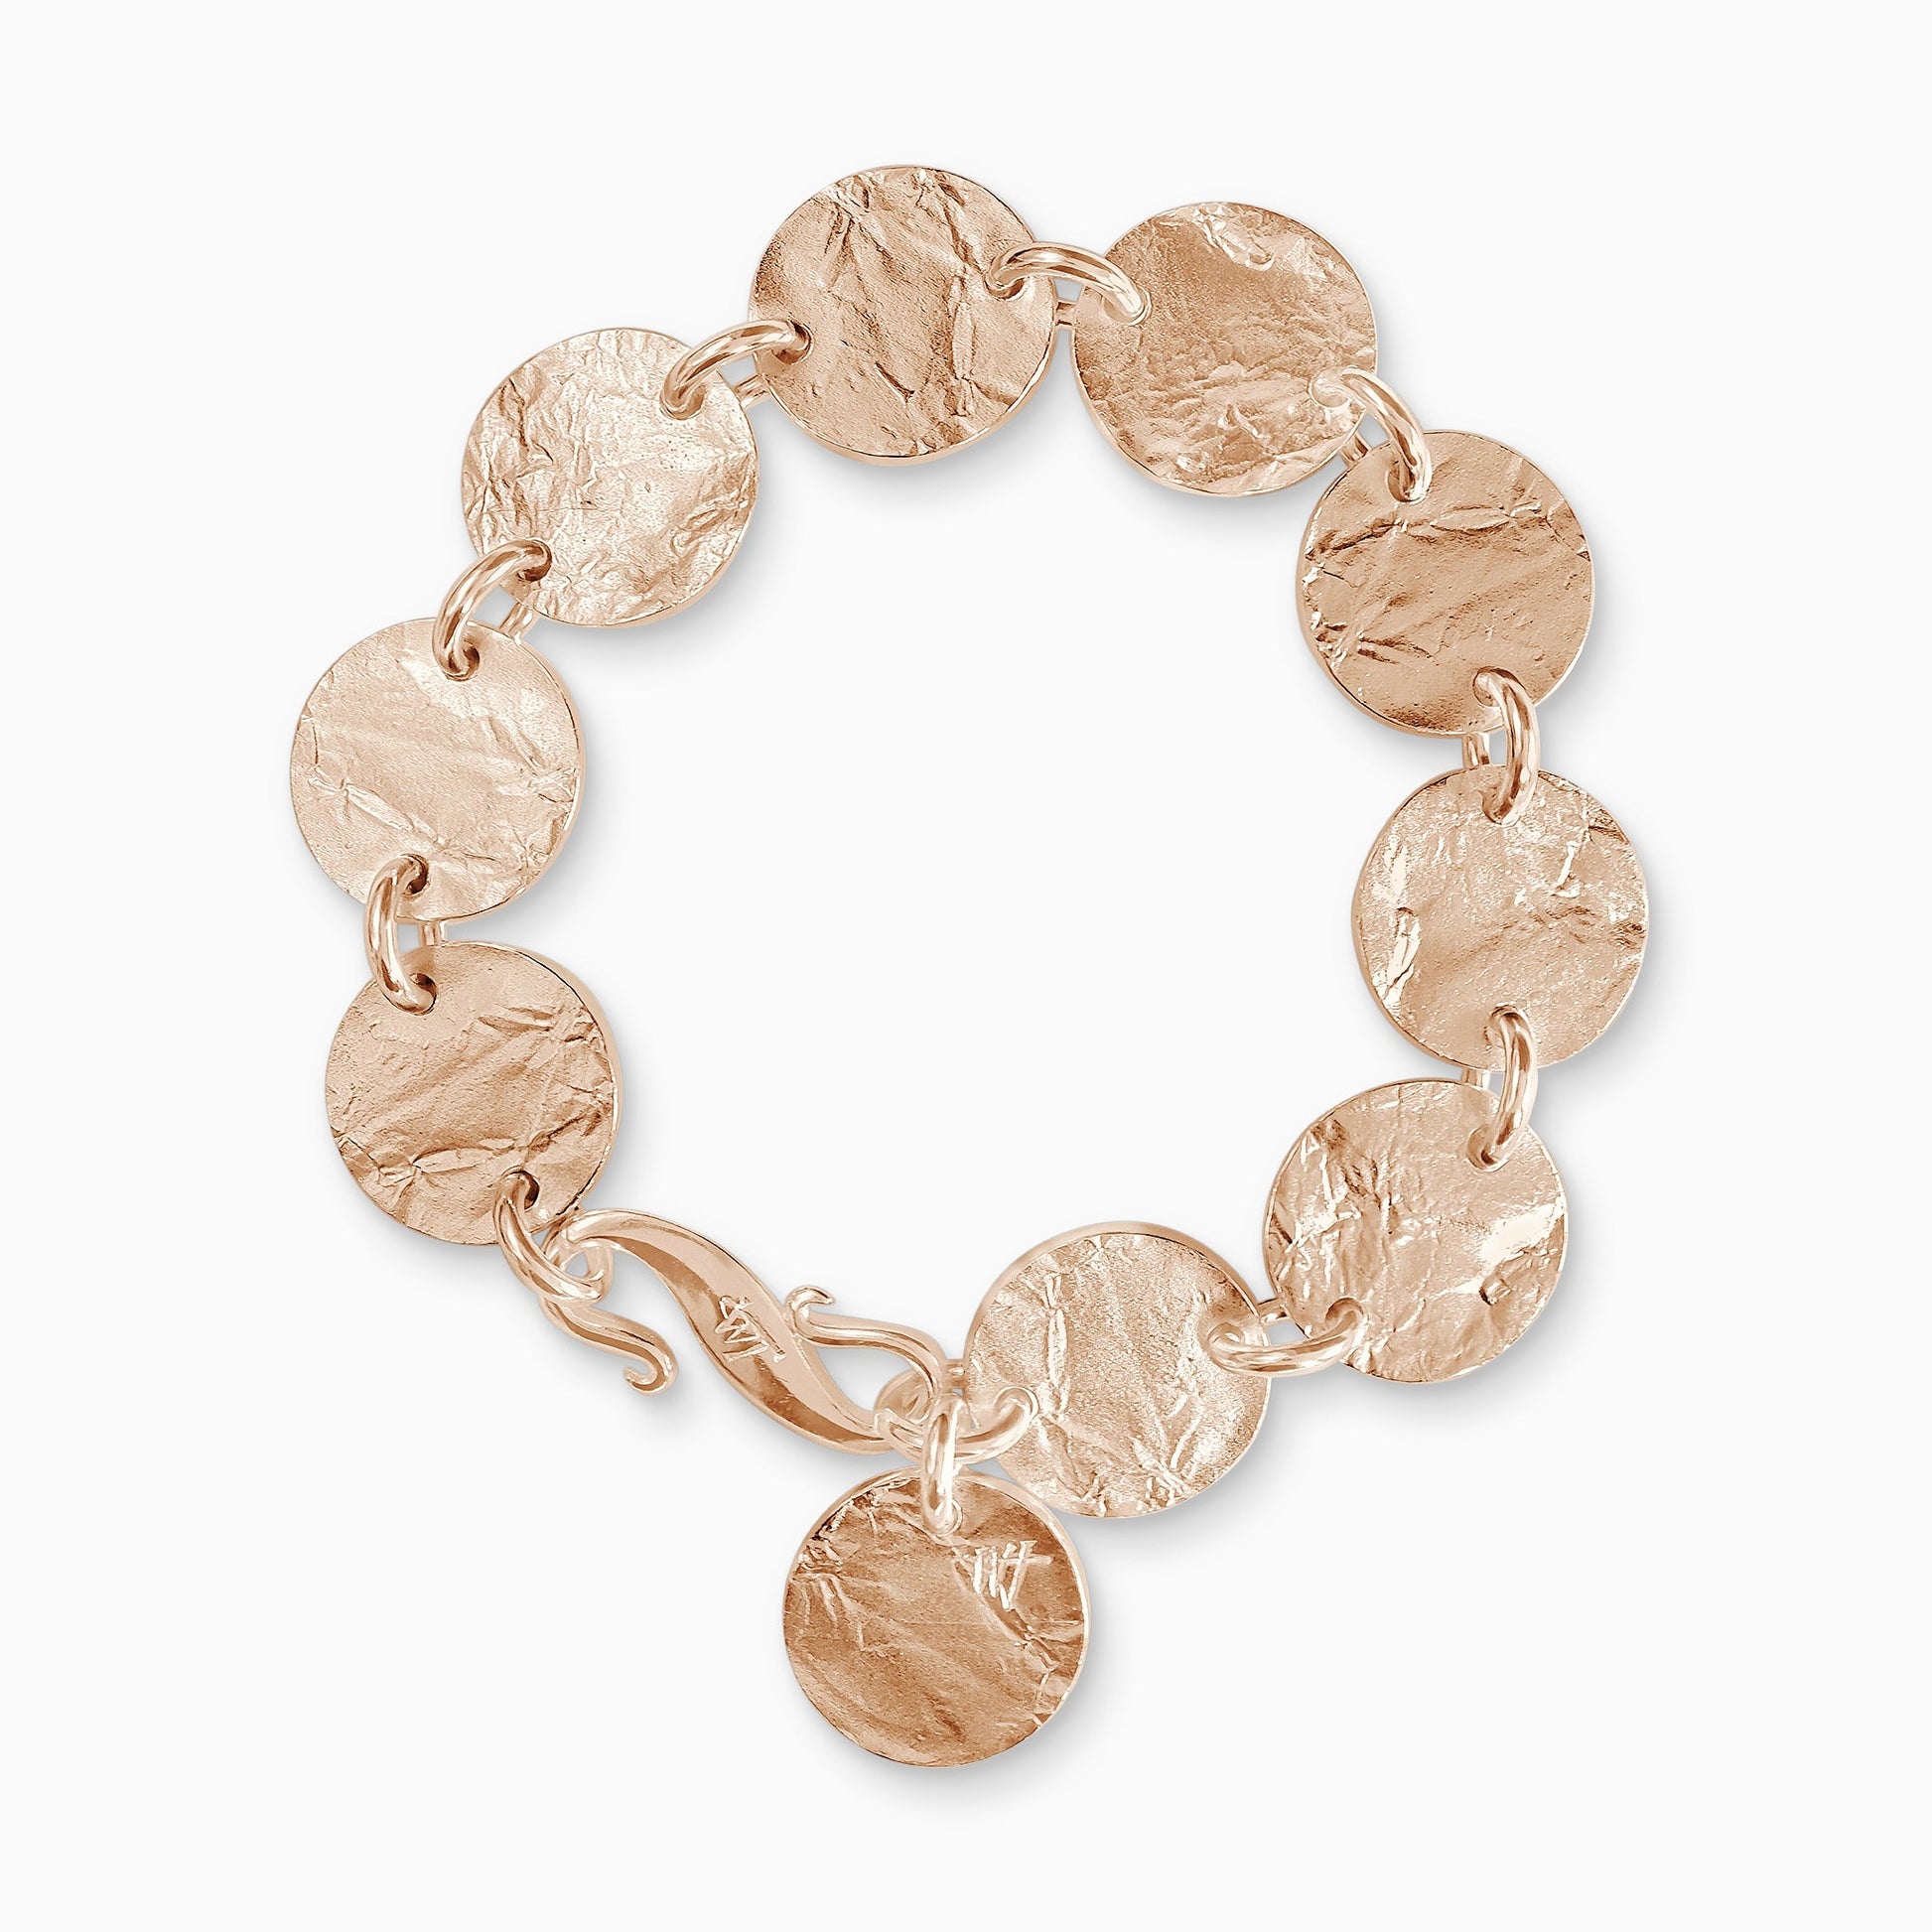 An 18ct Fairtrade rose gold bracelet of 9 linked textured discs with a 10th suspended near the large ’S’ clasp. Discs 17mm diameter. Bracelet length 190mm.